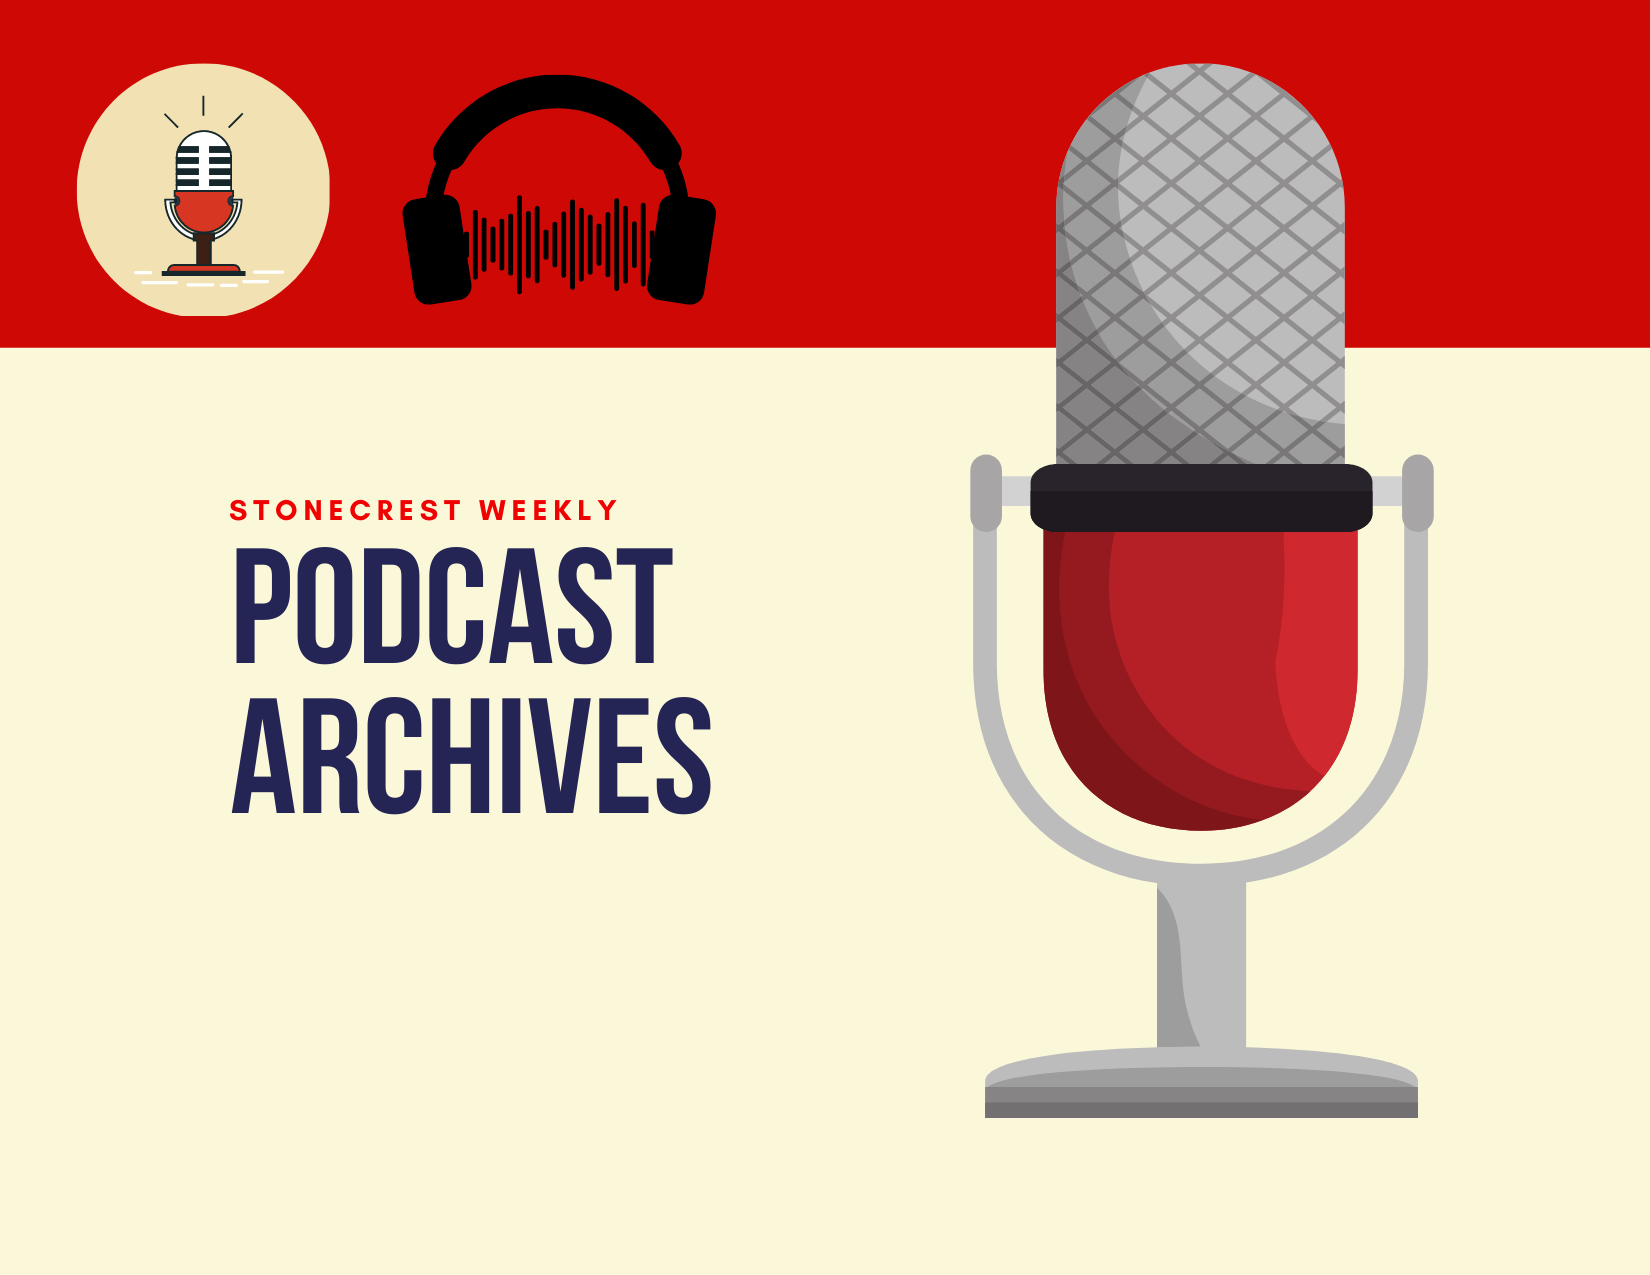 Podcast Archive